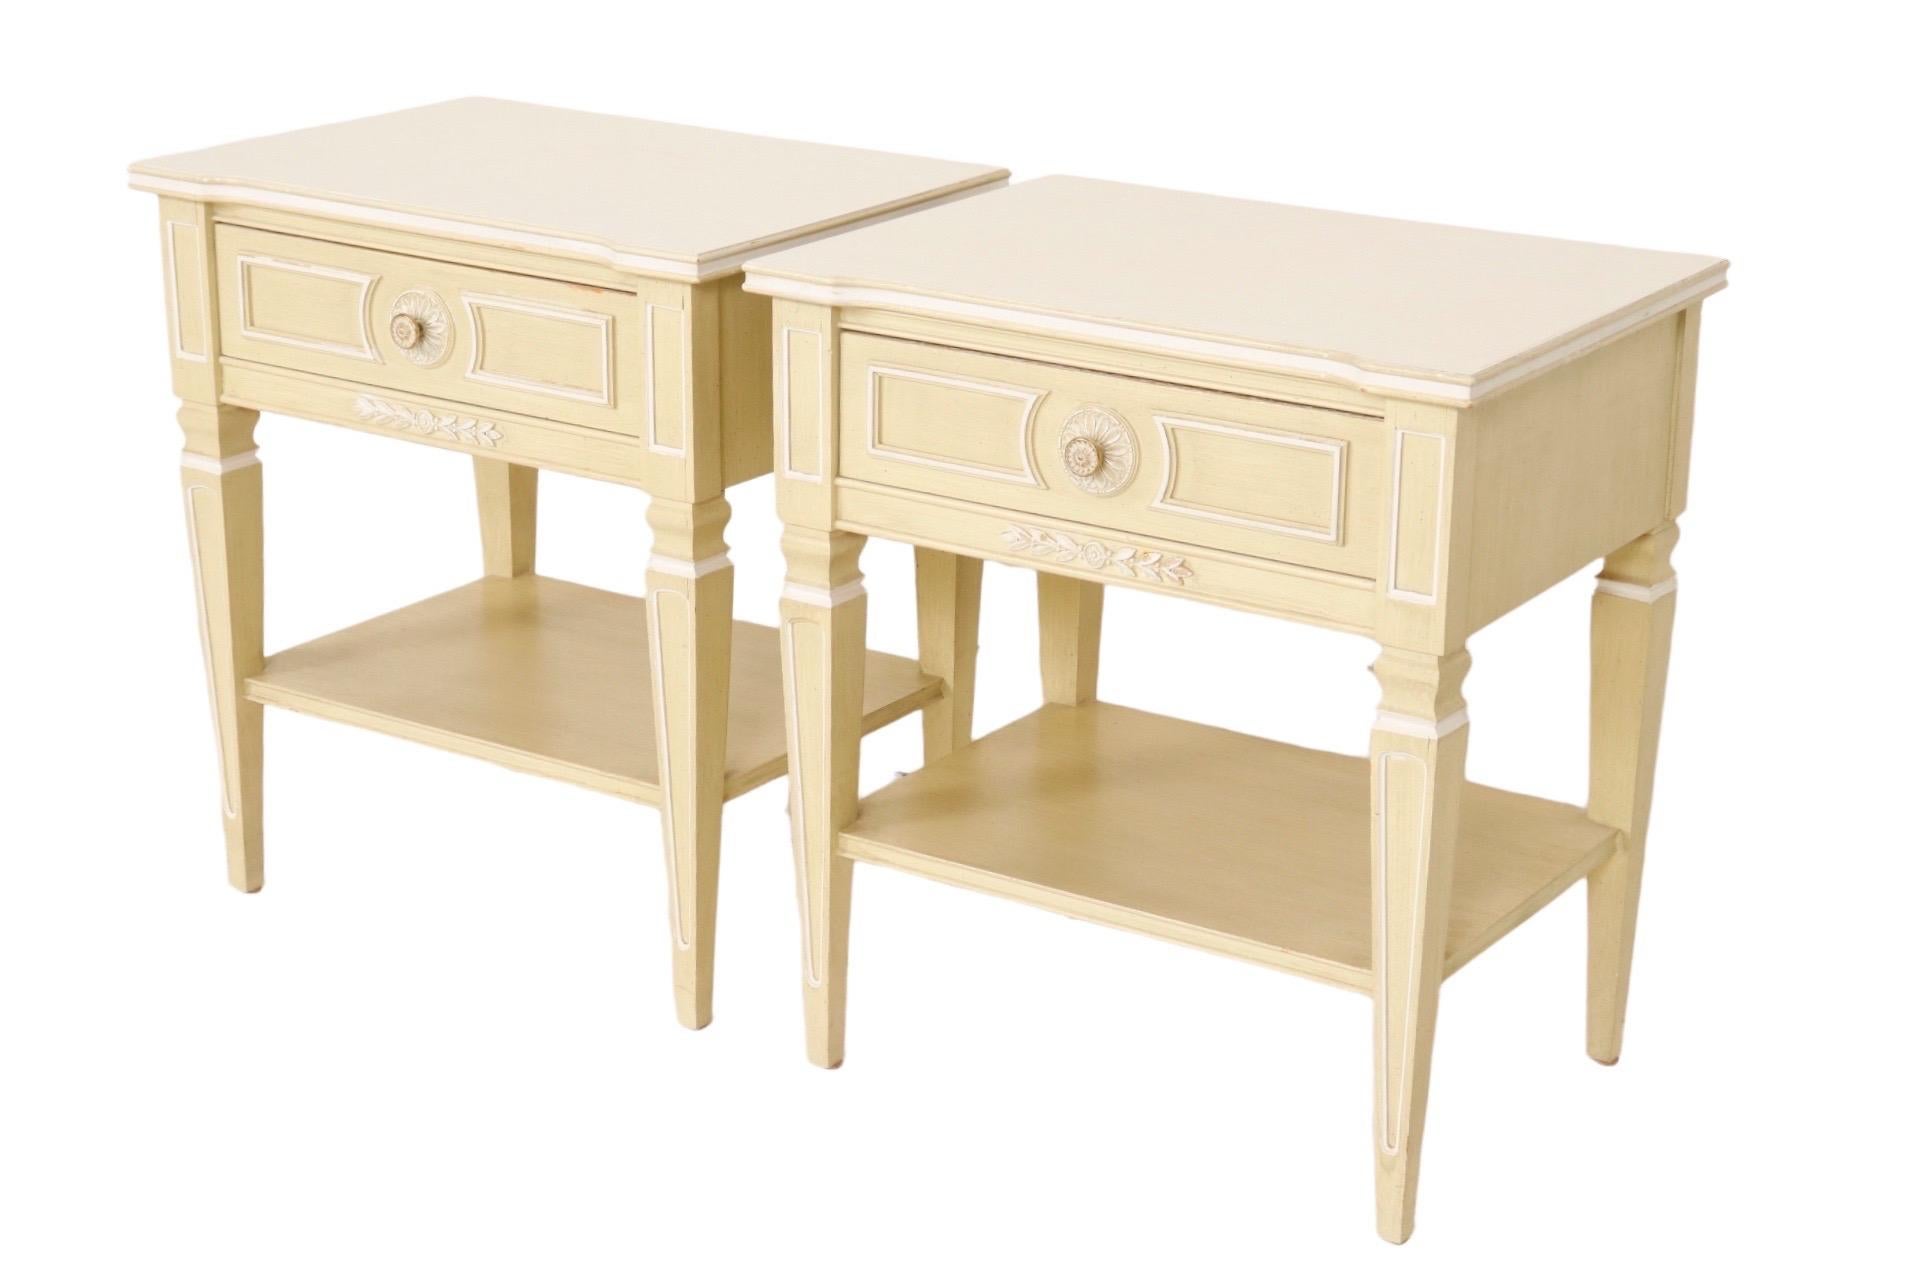 A Louis XVI style pair of side tables or nightstands made by Thomasville Furniture Industries of North Carolina. Each has a single drawer that opens with a flower pressed round metal handle. Drawer fronts are beaded to give the look of panels around